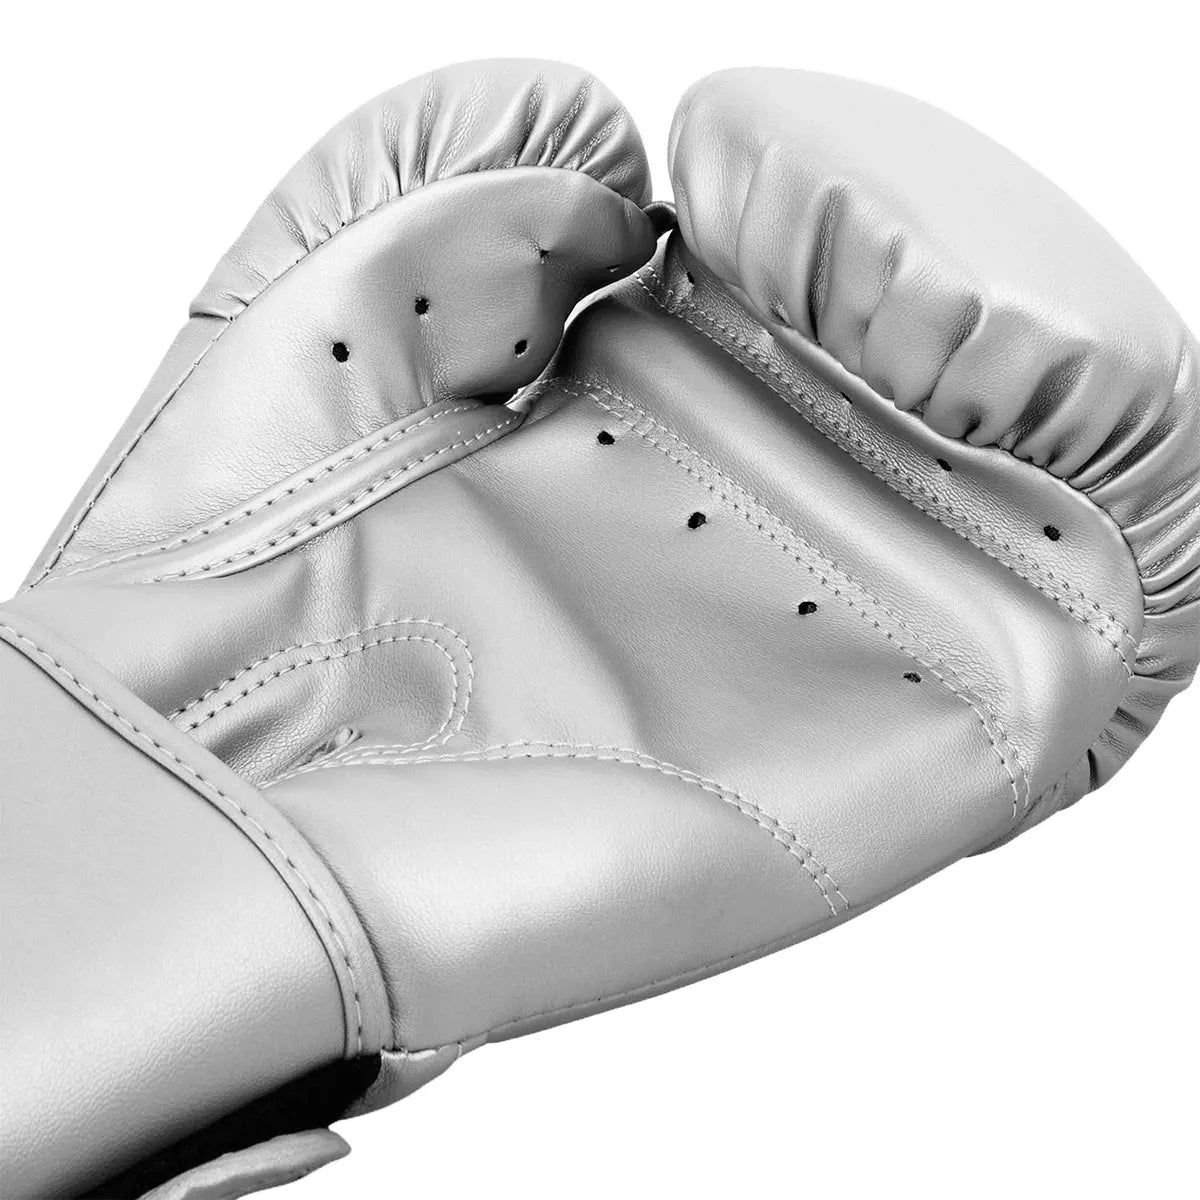 Venum Contender Hook and Loop Training Boxing Gloves - Silver/Silver Venum